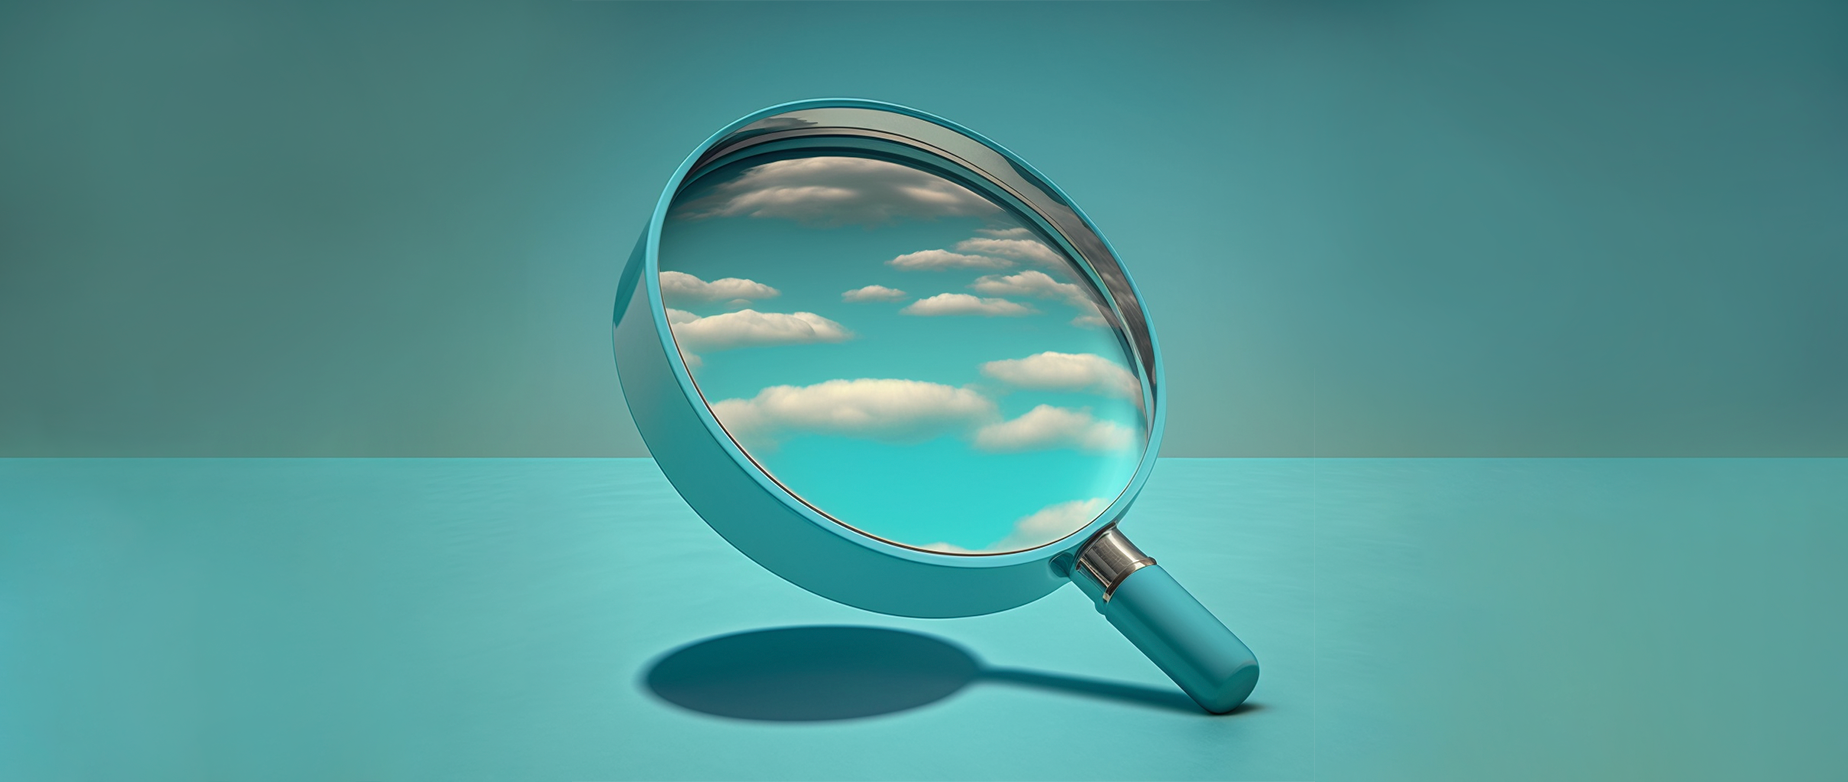 clouds and blue sky as seen through a magnifying glass